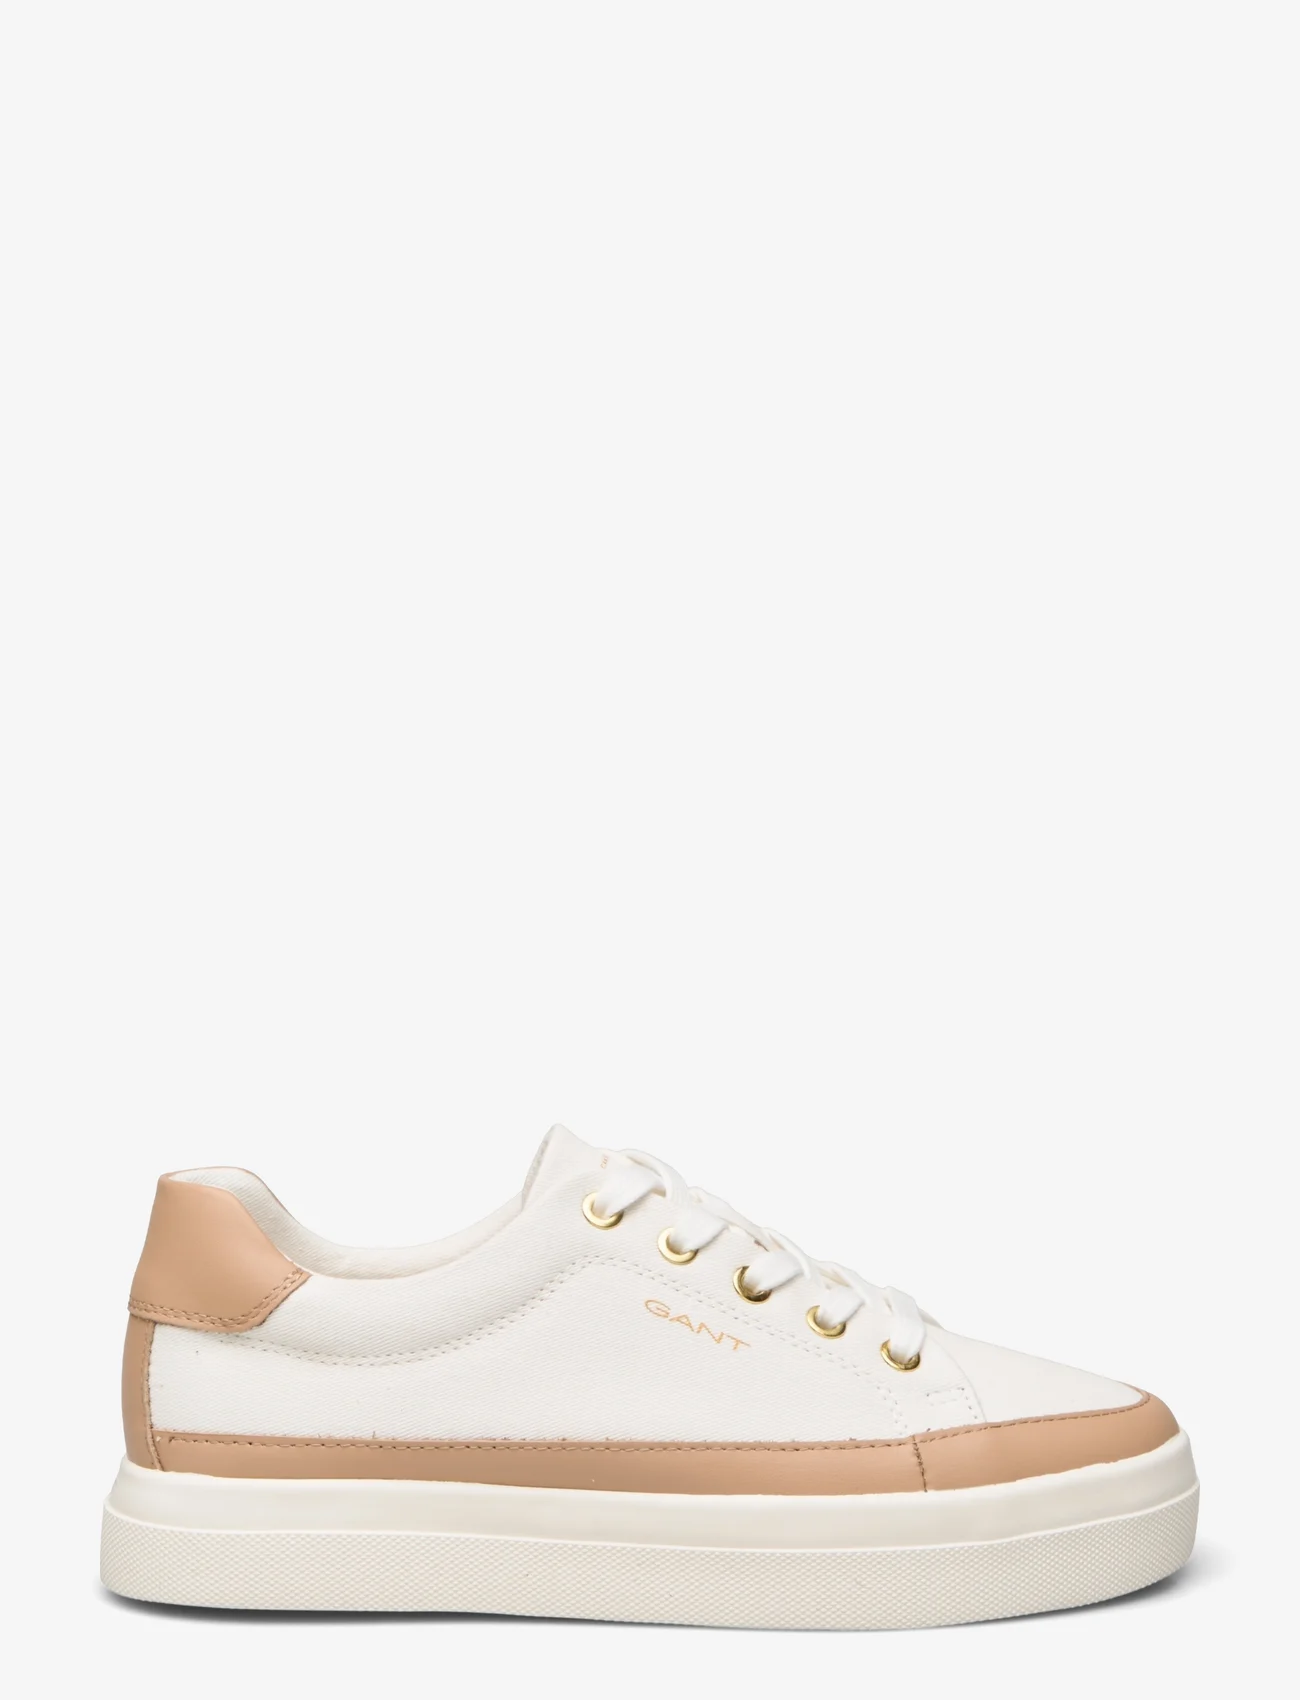 GANT - Avona Sneaker - lave sneakers - offwht./natural - 1